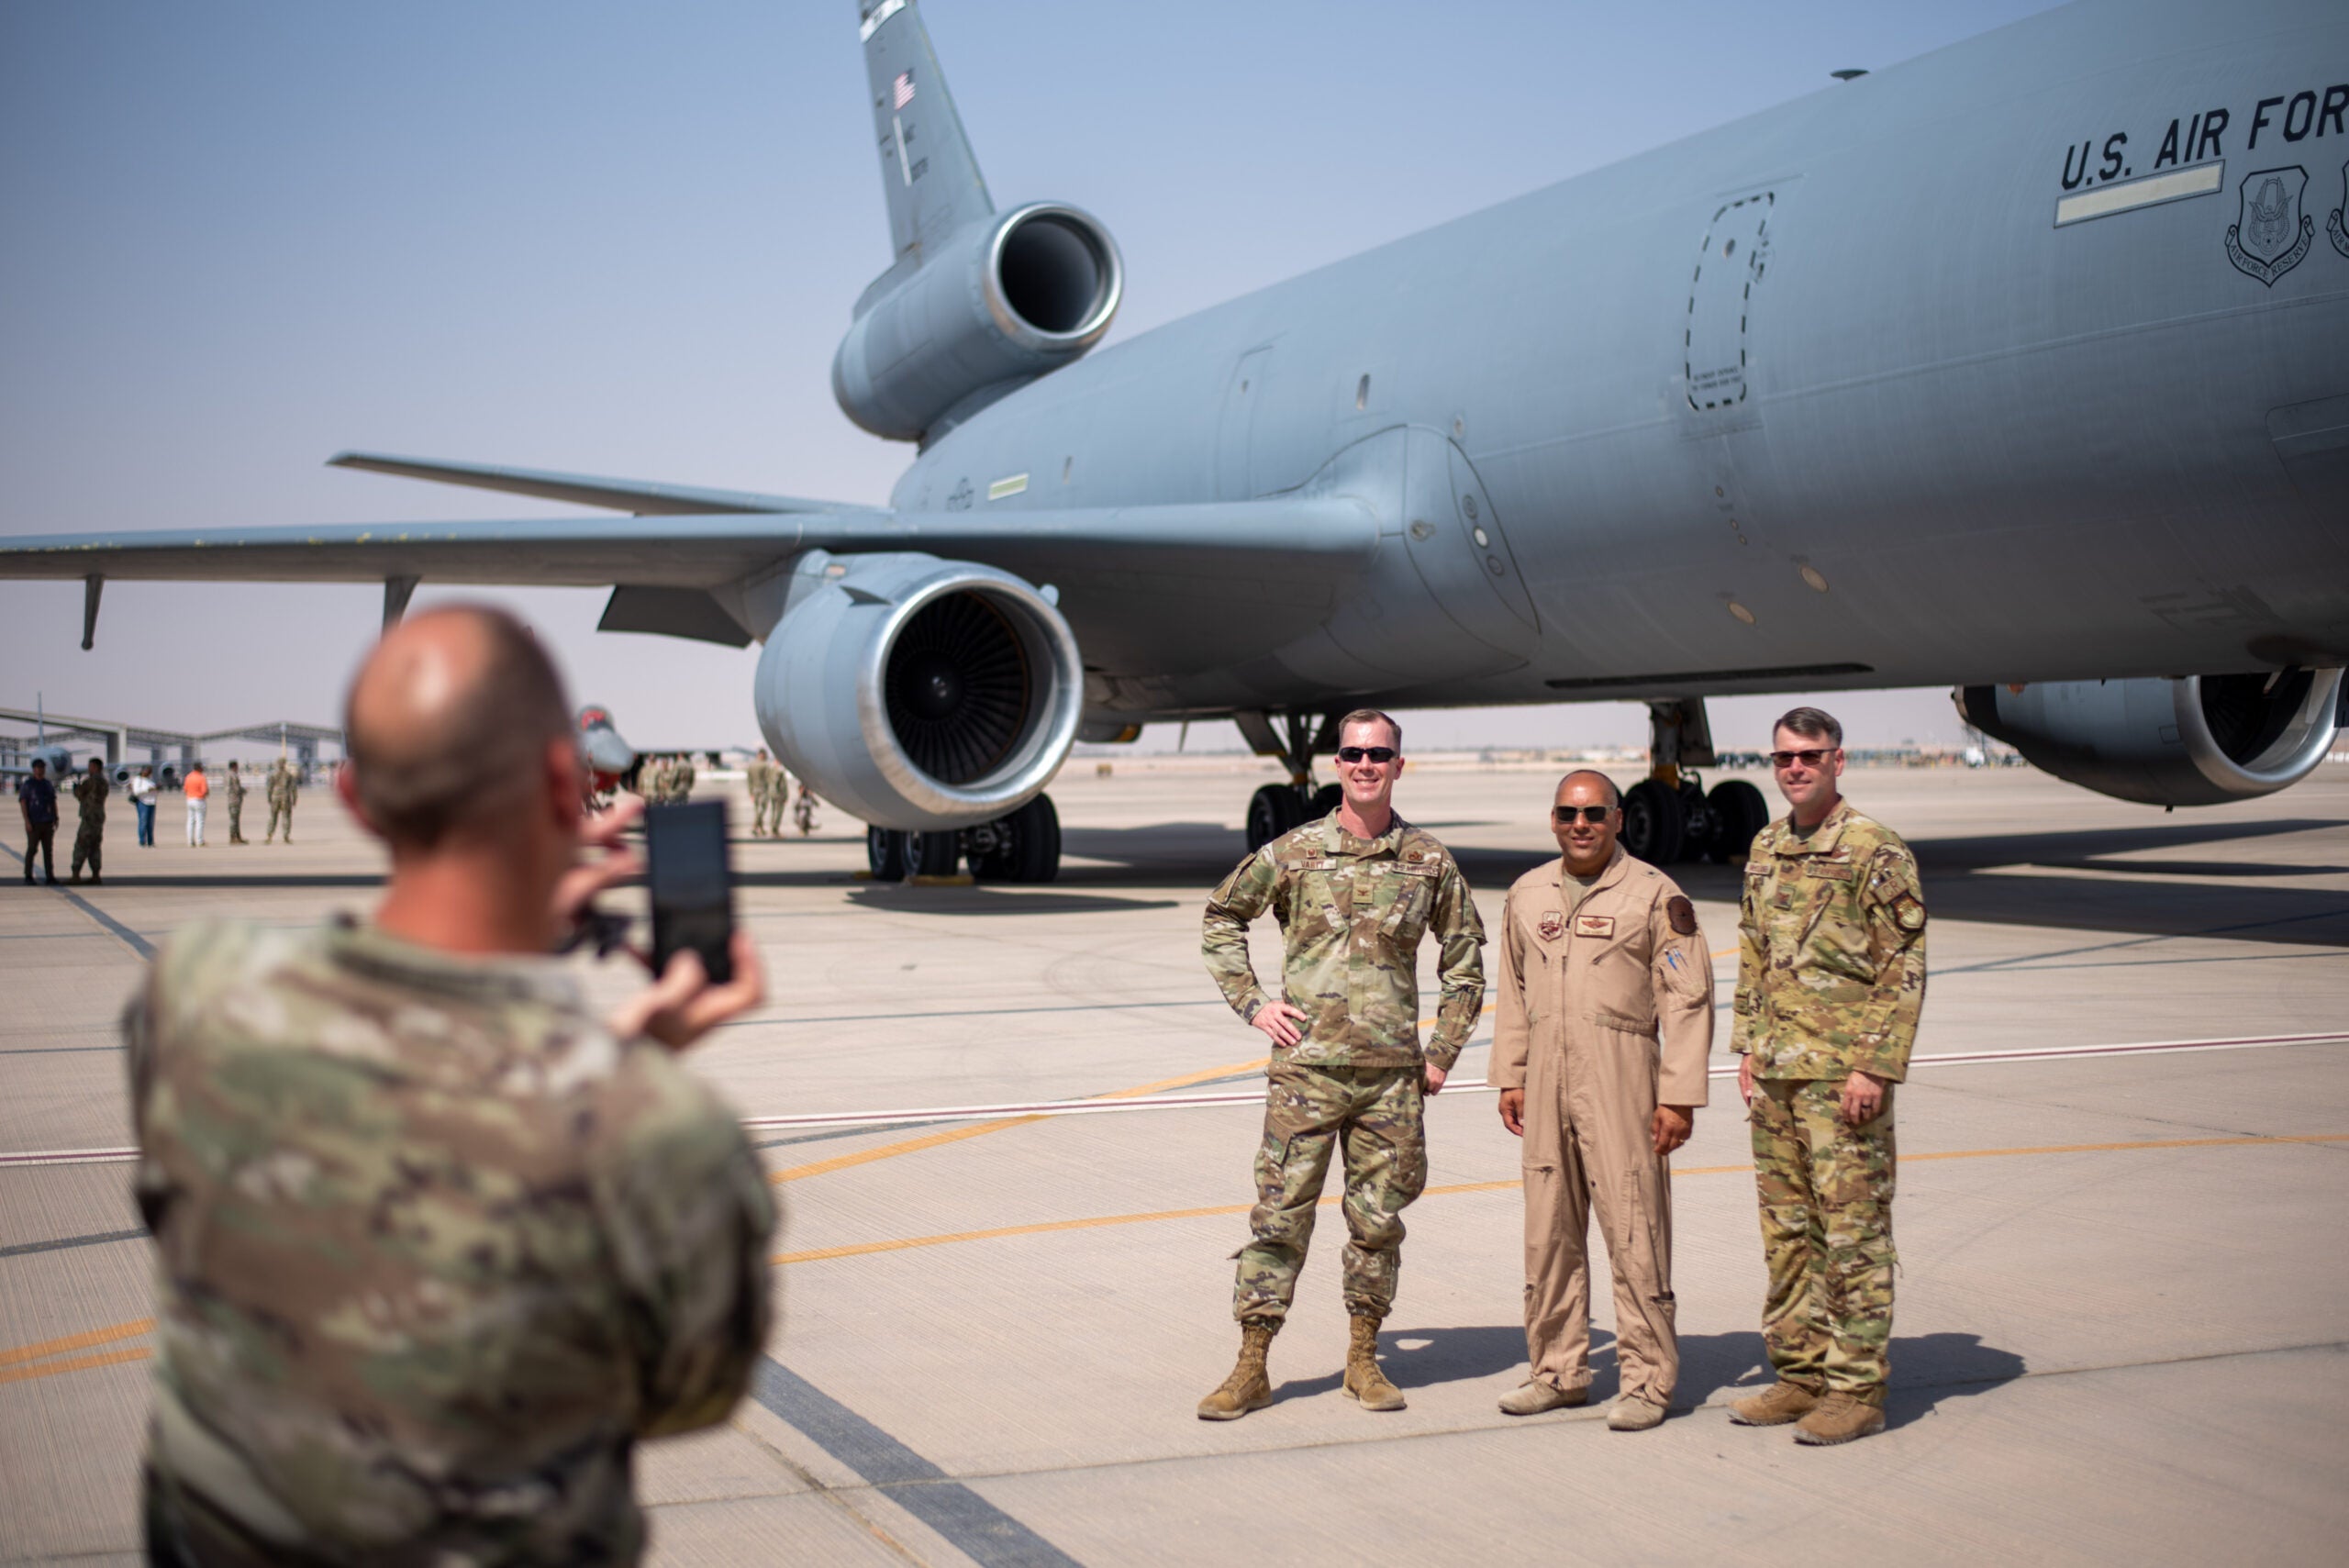 U.S. Air Force Col. Clinton Varty (left), 60th Maintenance Group commander, Brig. Gen. Akshai Gandhi (center), 378th Air Expeditionary Wing commander, and Col. Colin McClaskey (right), 821st Contingency Response Group deputy commander, pose for a group photo in front of a KC-10 Extender after an inactivation ceremony for the 908th Expeditionary Air Refueling Squadron at Prince Sultan Air Base, Kingdom of Saudi Arabia, Oct. 4, 2023. The ceremony highlighted the legacy of the KC-10 after over 30 years of service within the U.S. Air Forces Central (AFCENT) Area of Responsibility. By September 2024, the U.S. Air Force's fleet of KC-10s will be decommissioned and gradually replaced by the KC-46 aircraft. (U.S. Air Force photo by Tech. Sgt. Alexander Frank)